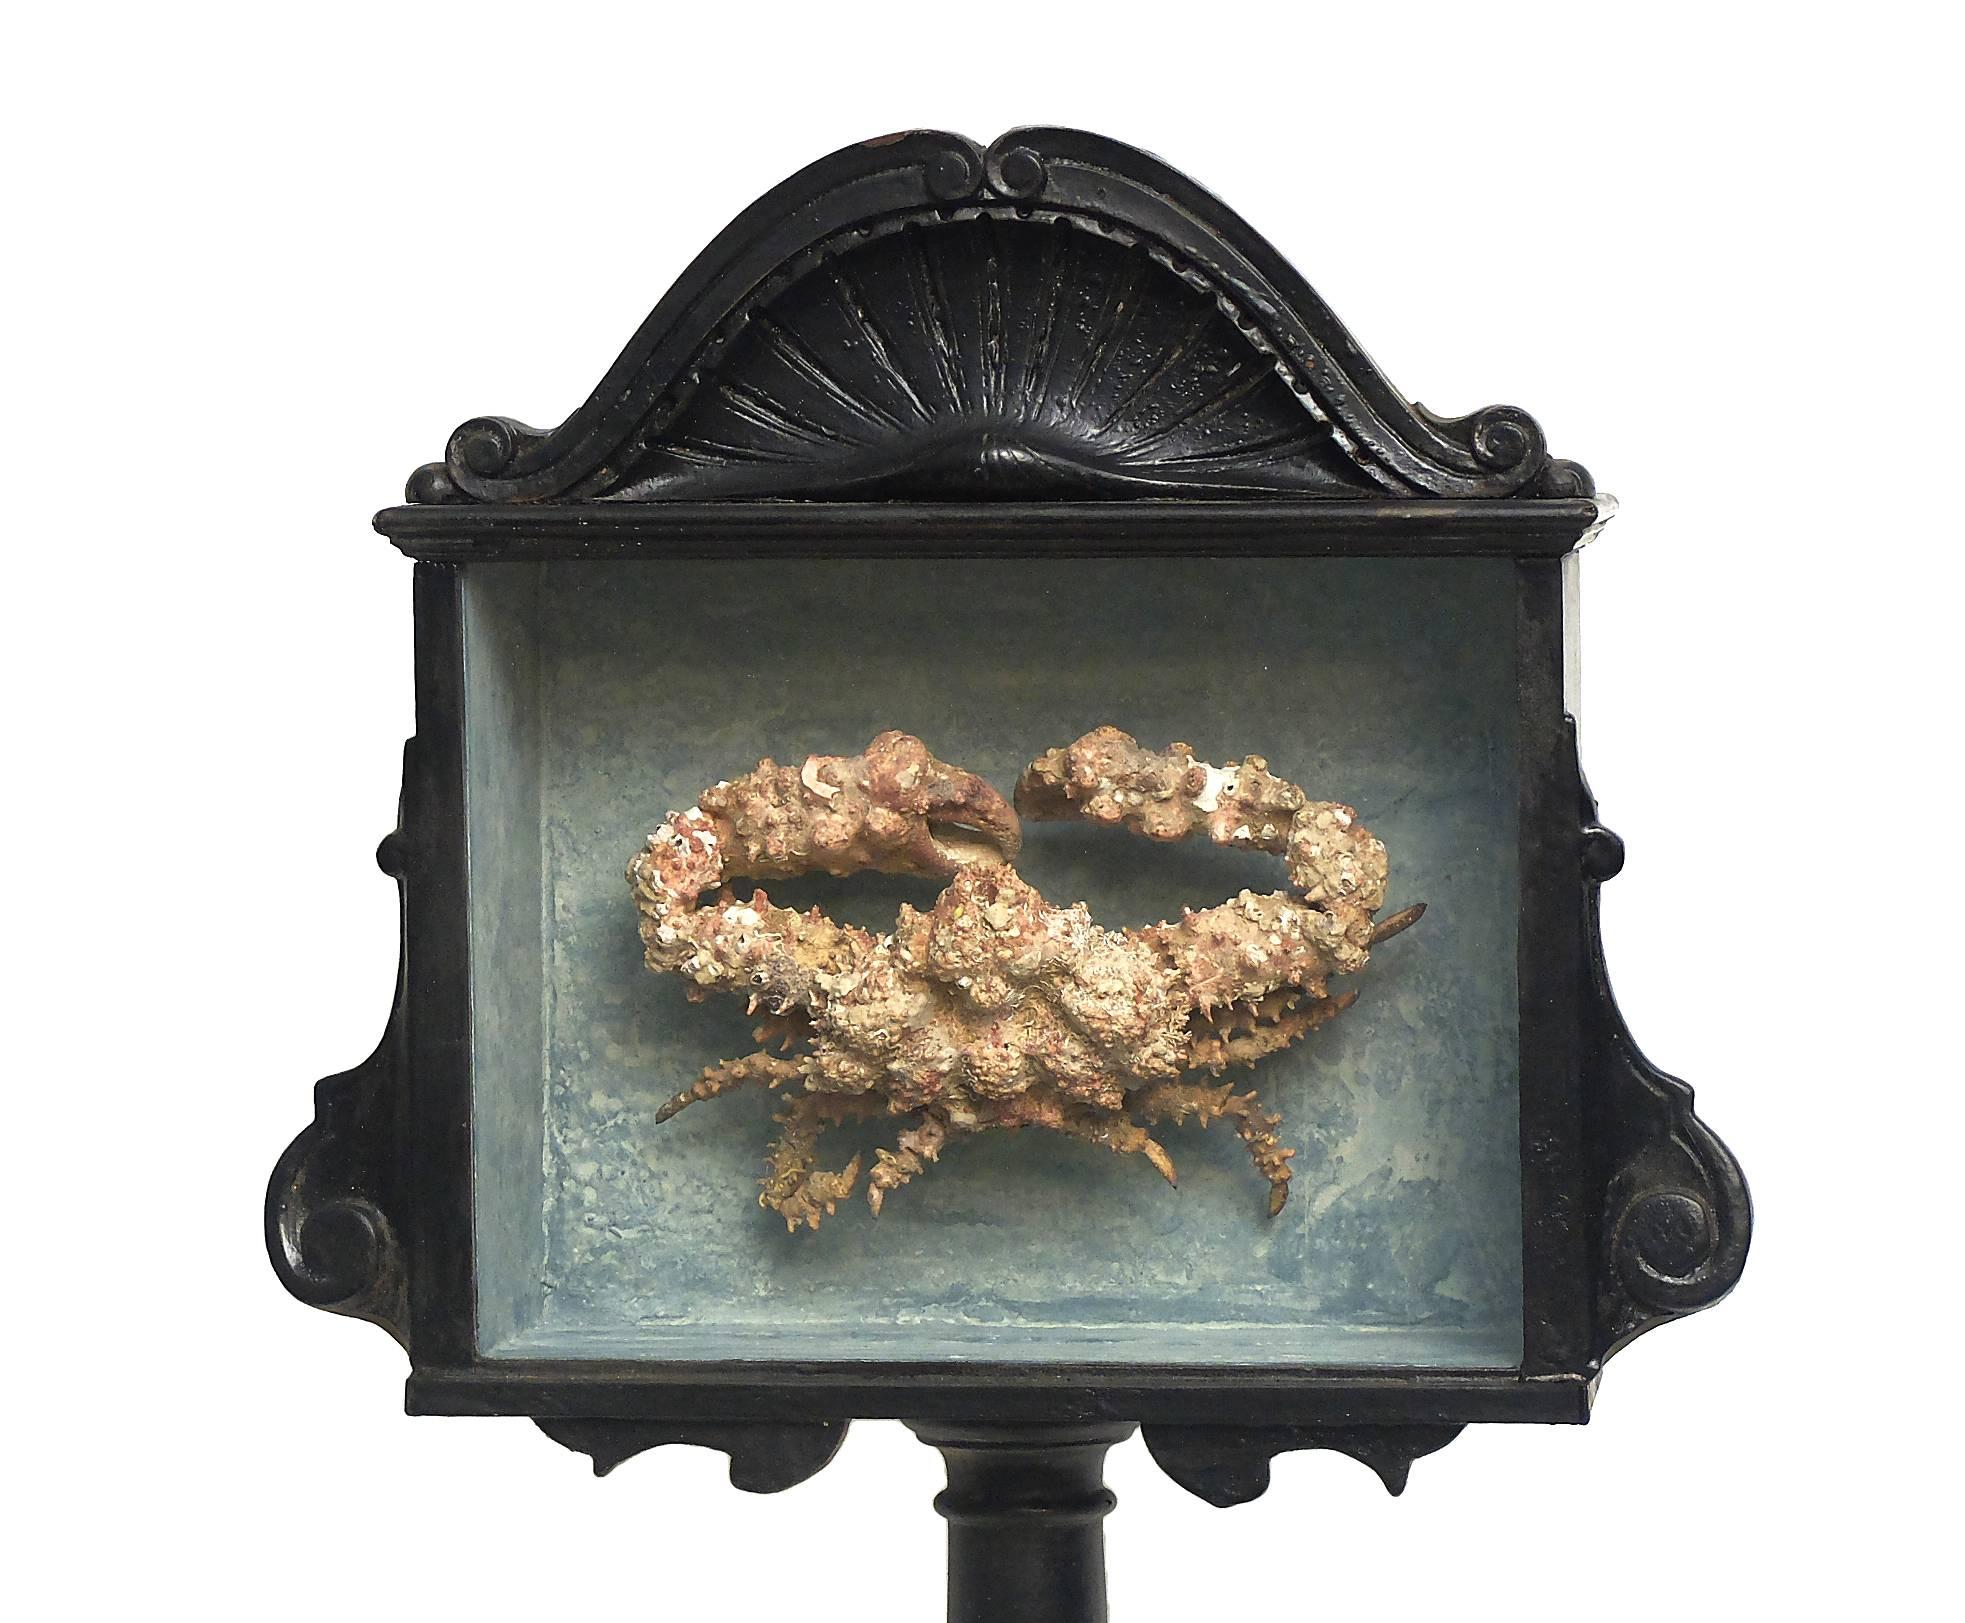 A rare marine natural wunderkammer specimen of a crab. The specimen is stuffed and mounted inside a painted black wooden show case with glass, Italy, circa 1880.